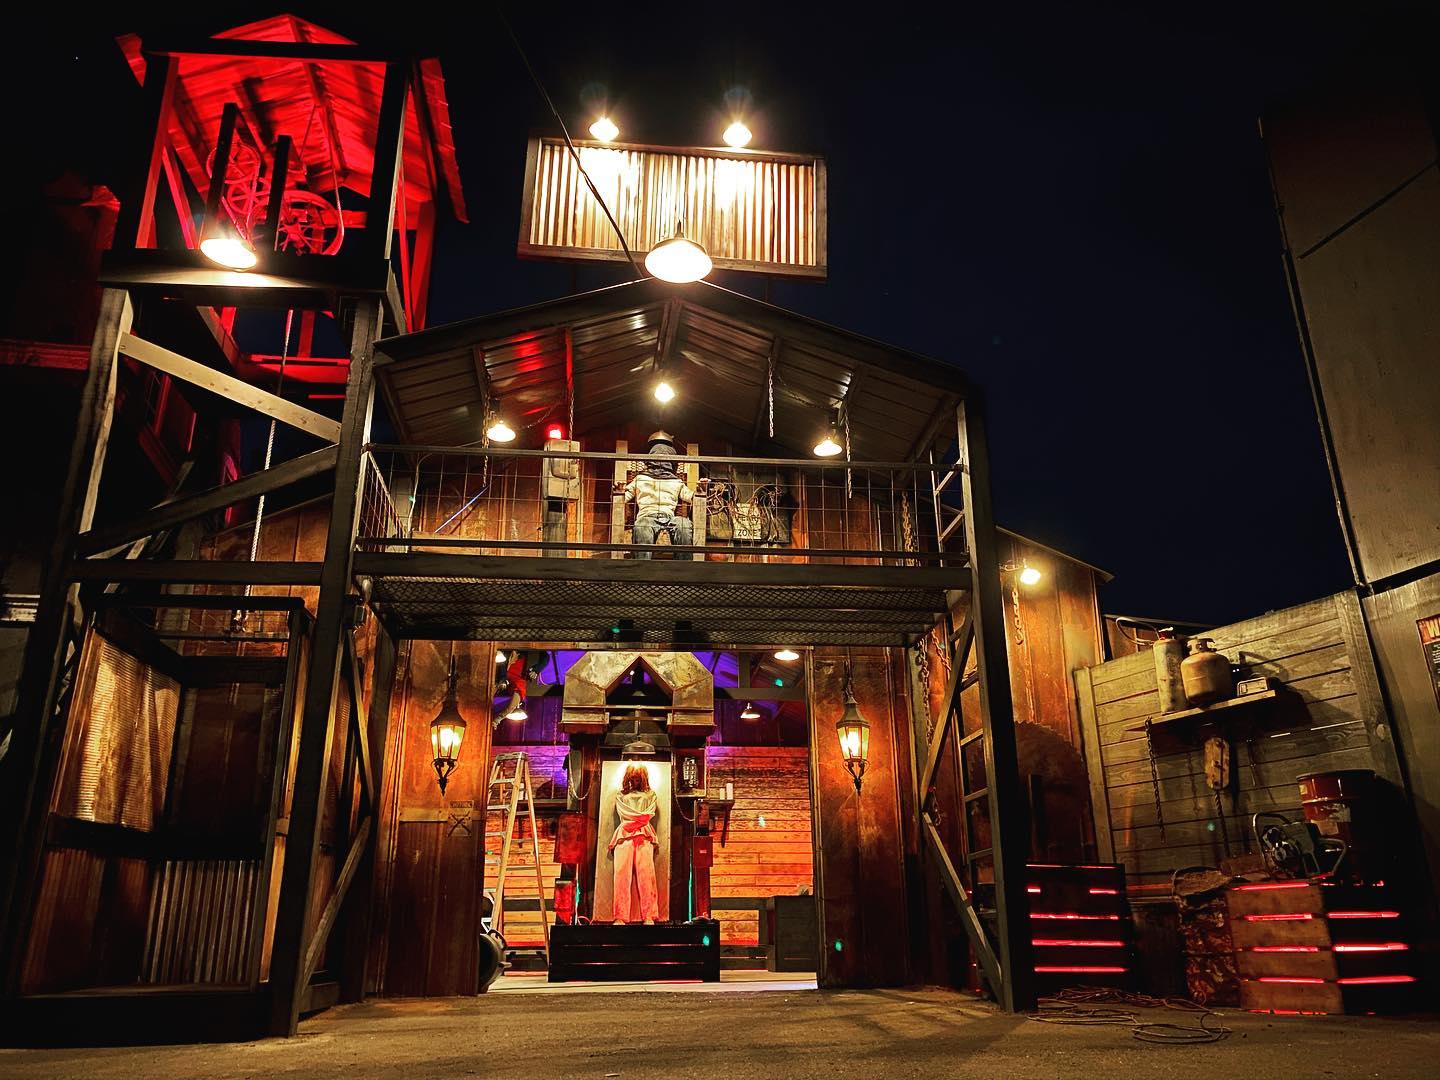 Madworld Haunted Attraction, Best Haunted House in South Carolina